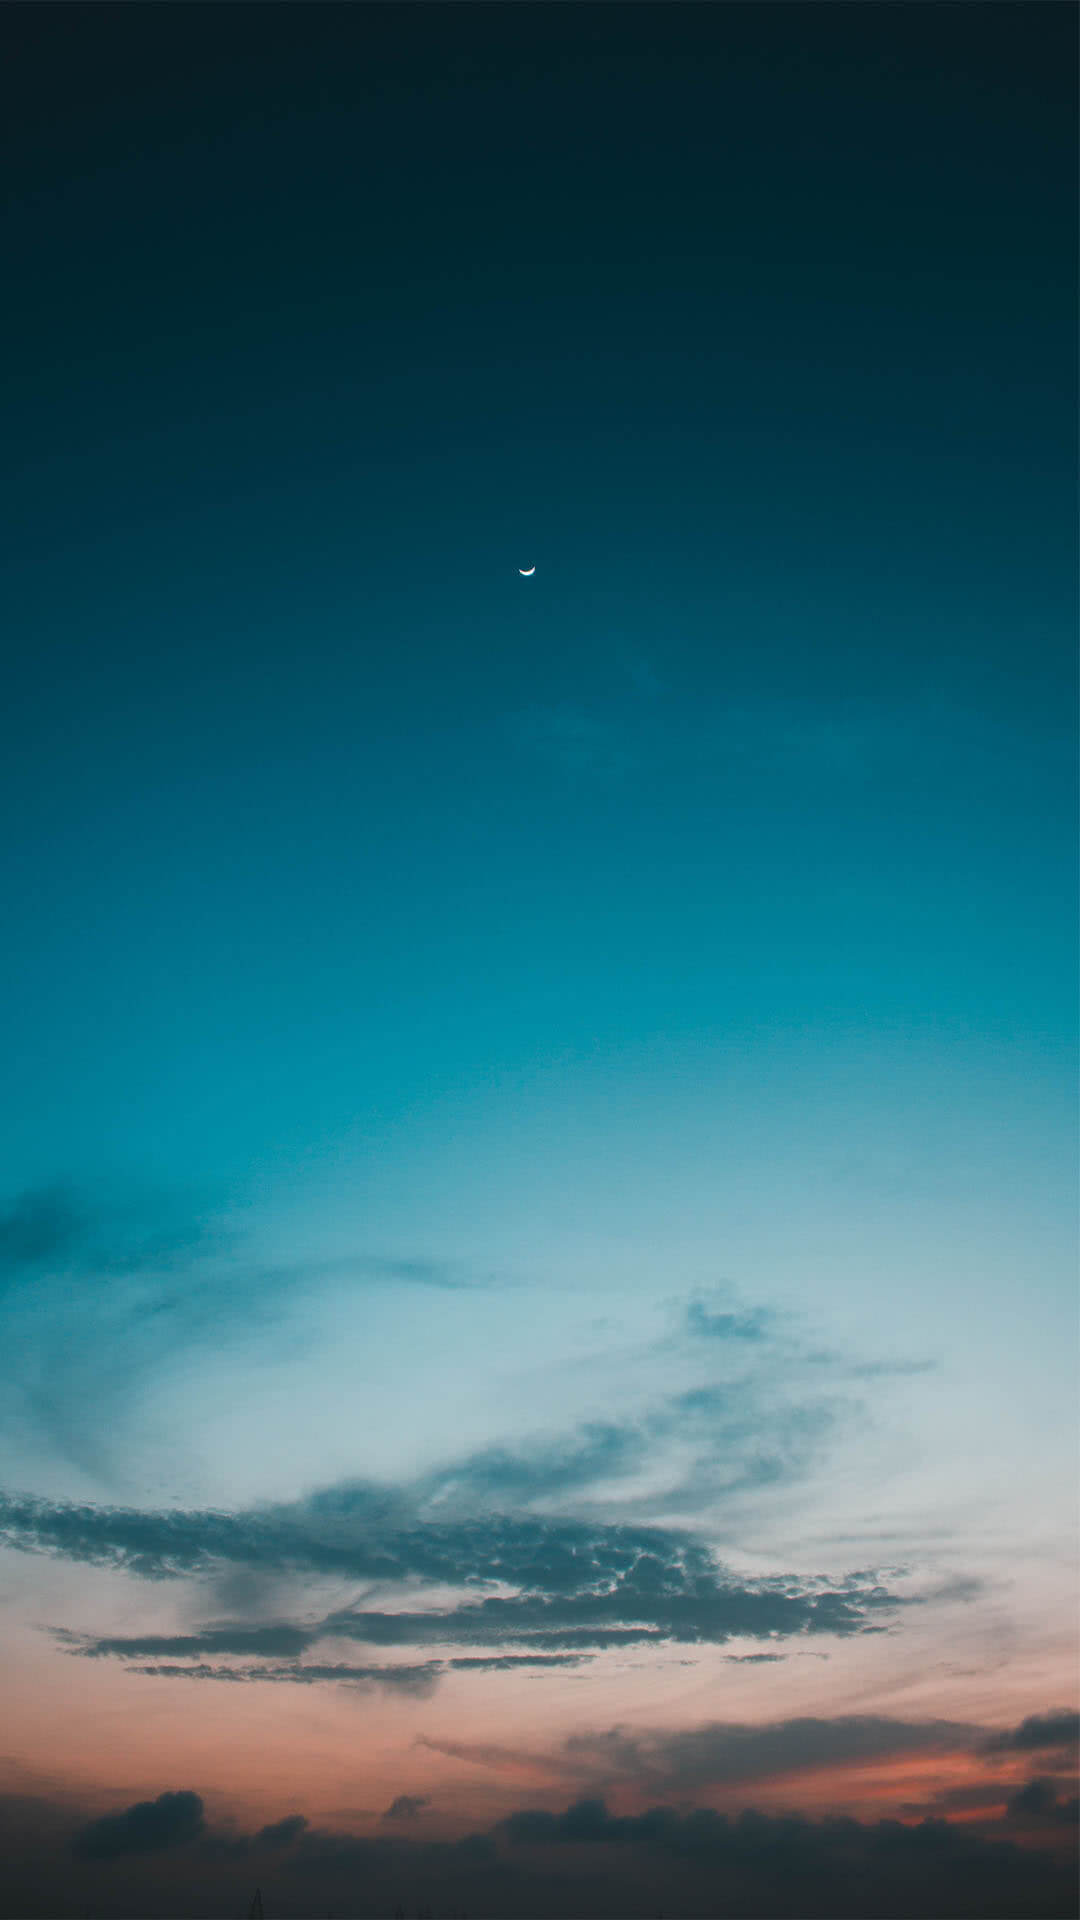 Sky At Dawn Iphone Wallpapers